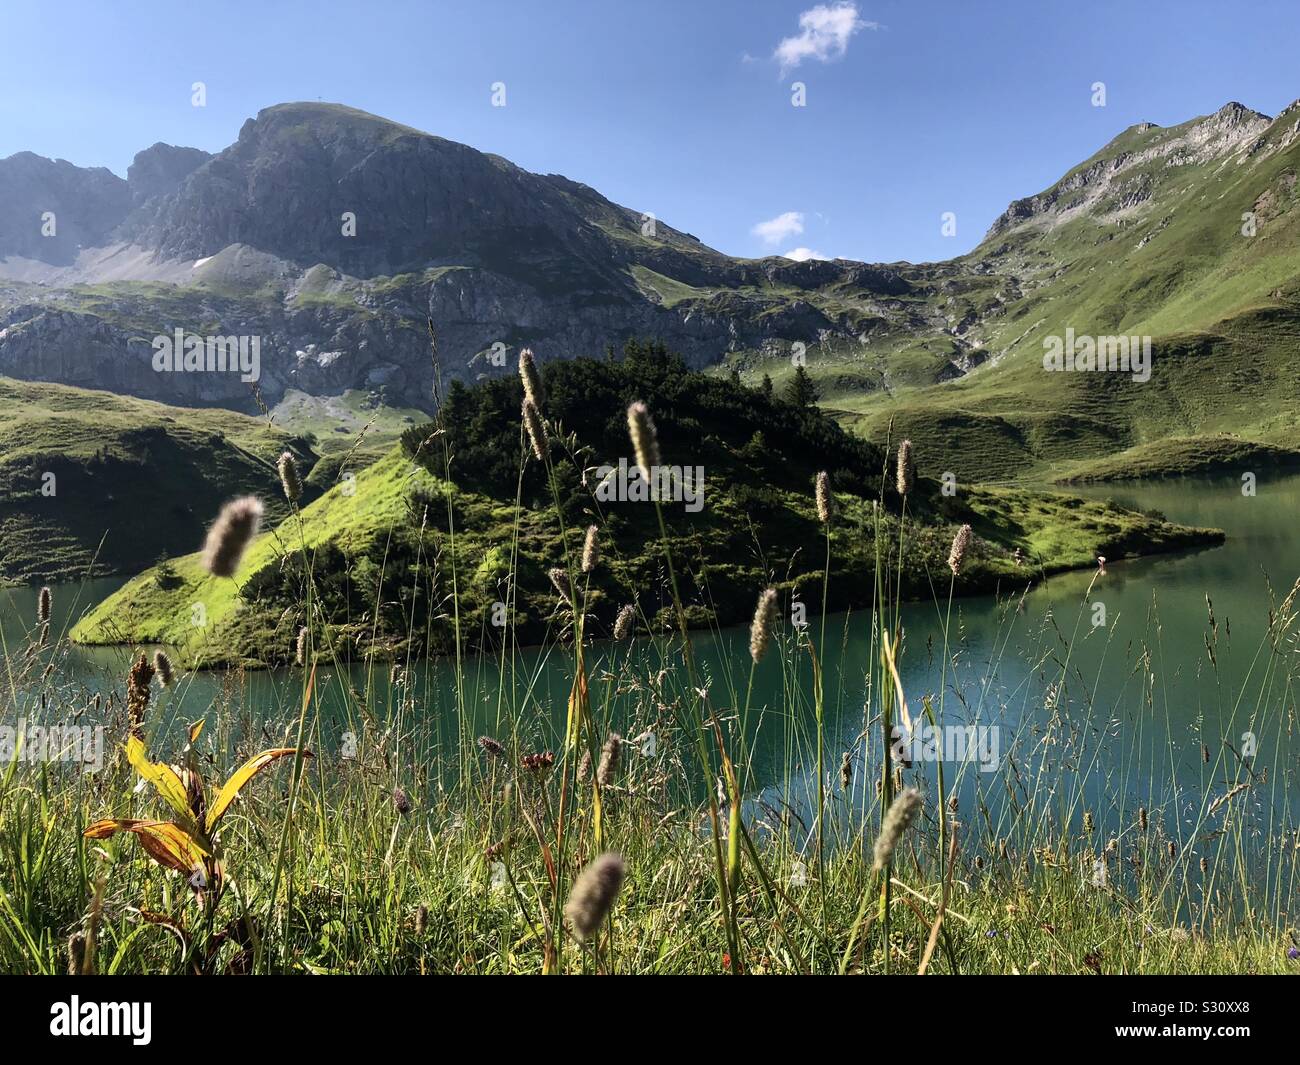 Small island in the middle of the beautiful Schrecksee in the Allgäu Alps, Germany. Stock Photo